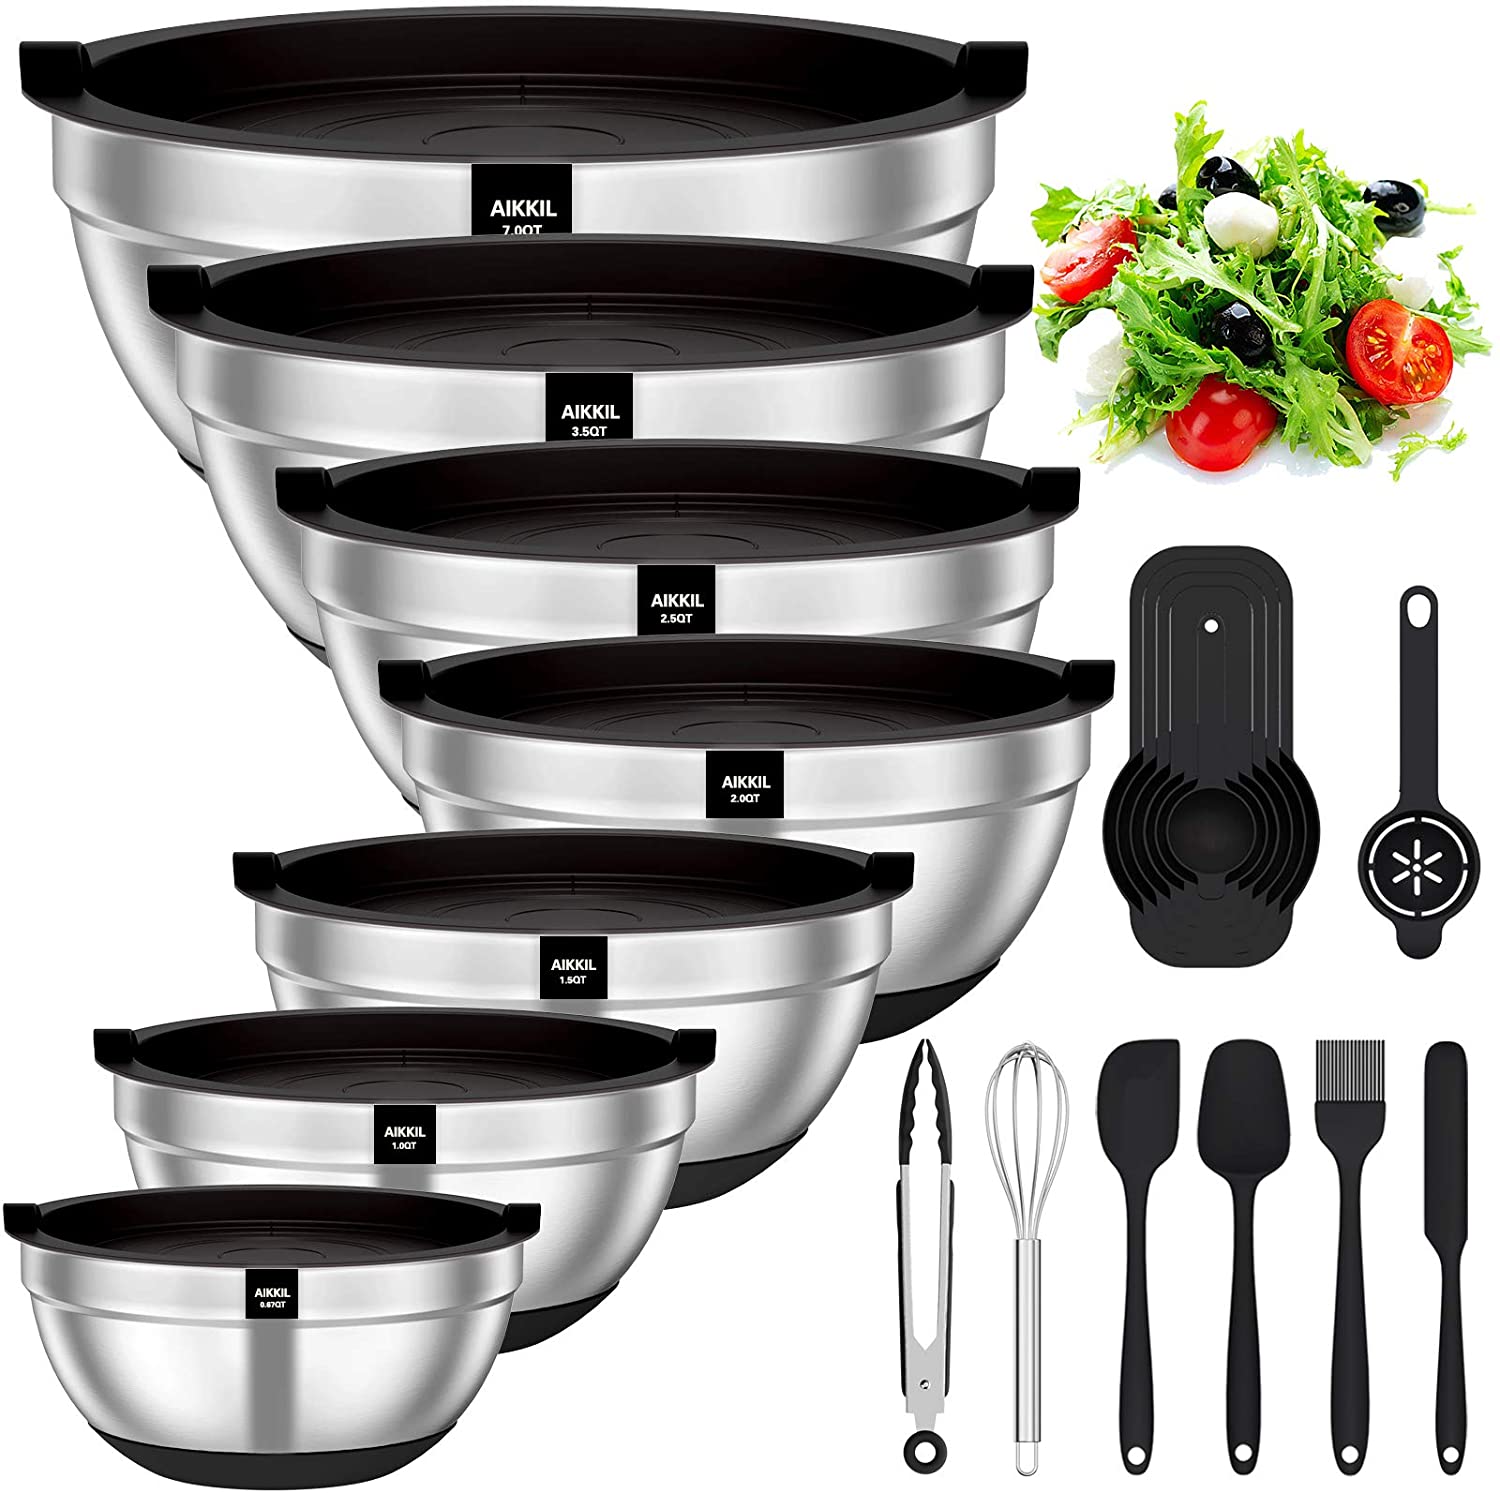 Mixing Bowls with Airtight Lids 20 piece